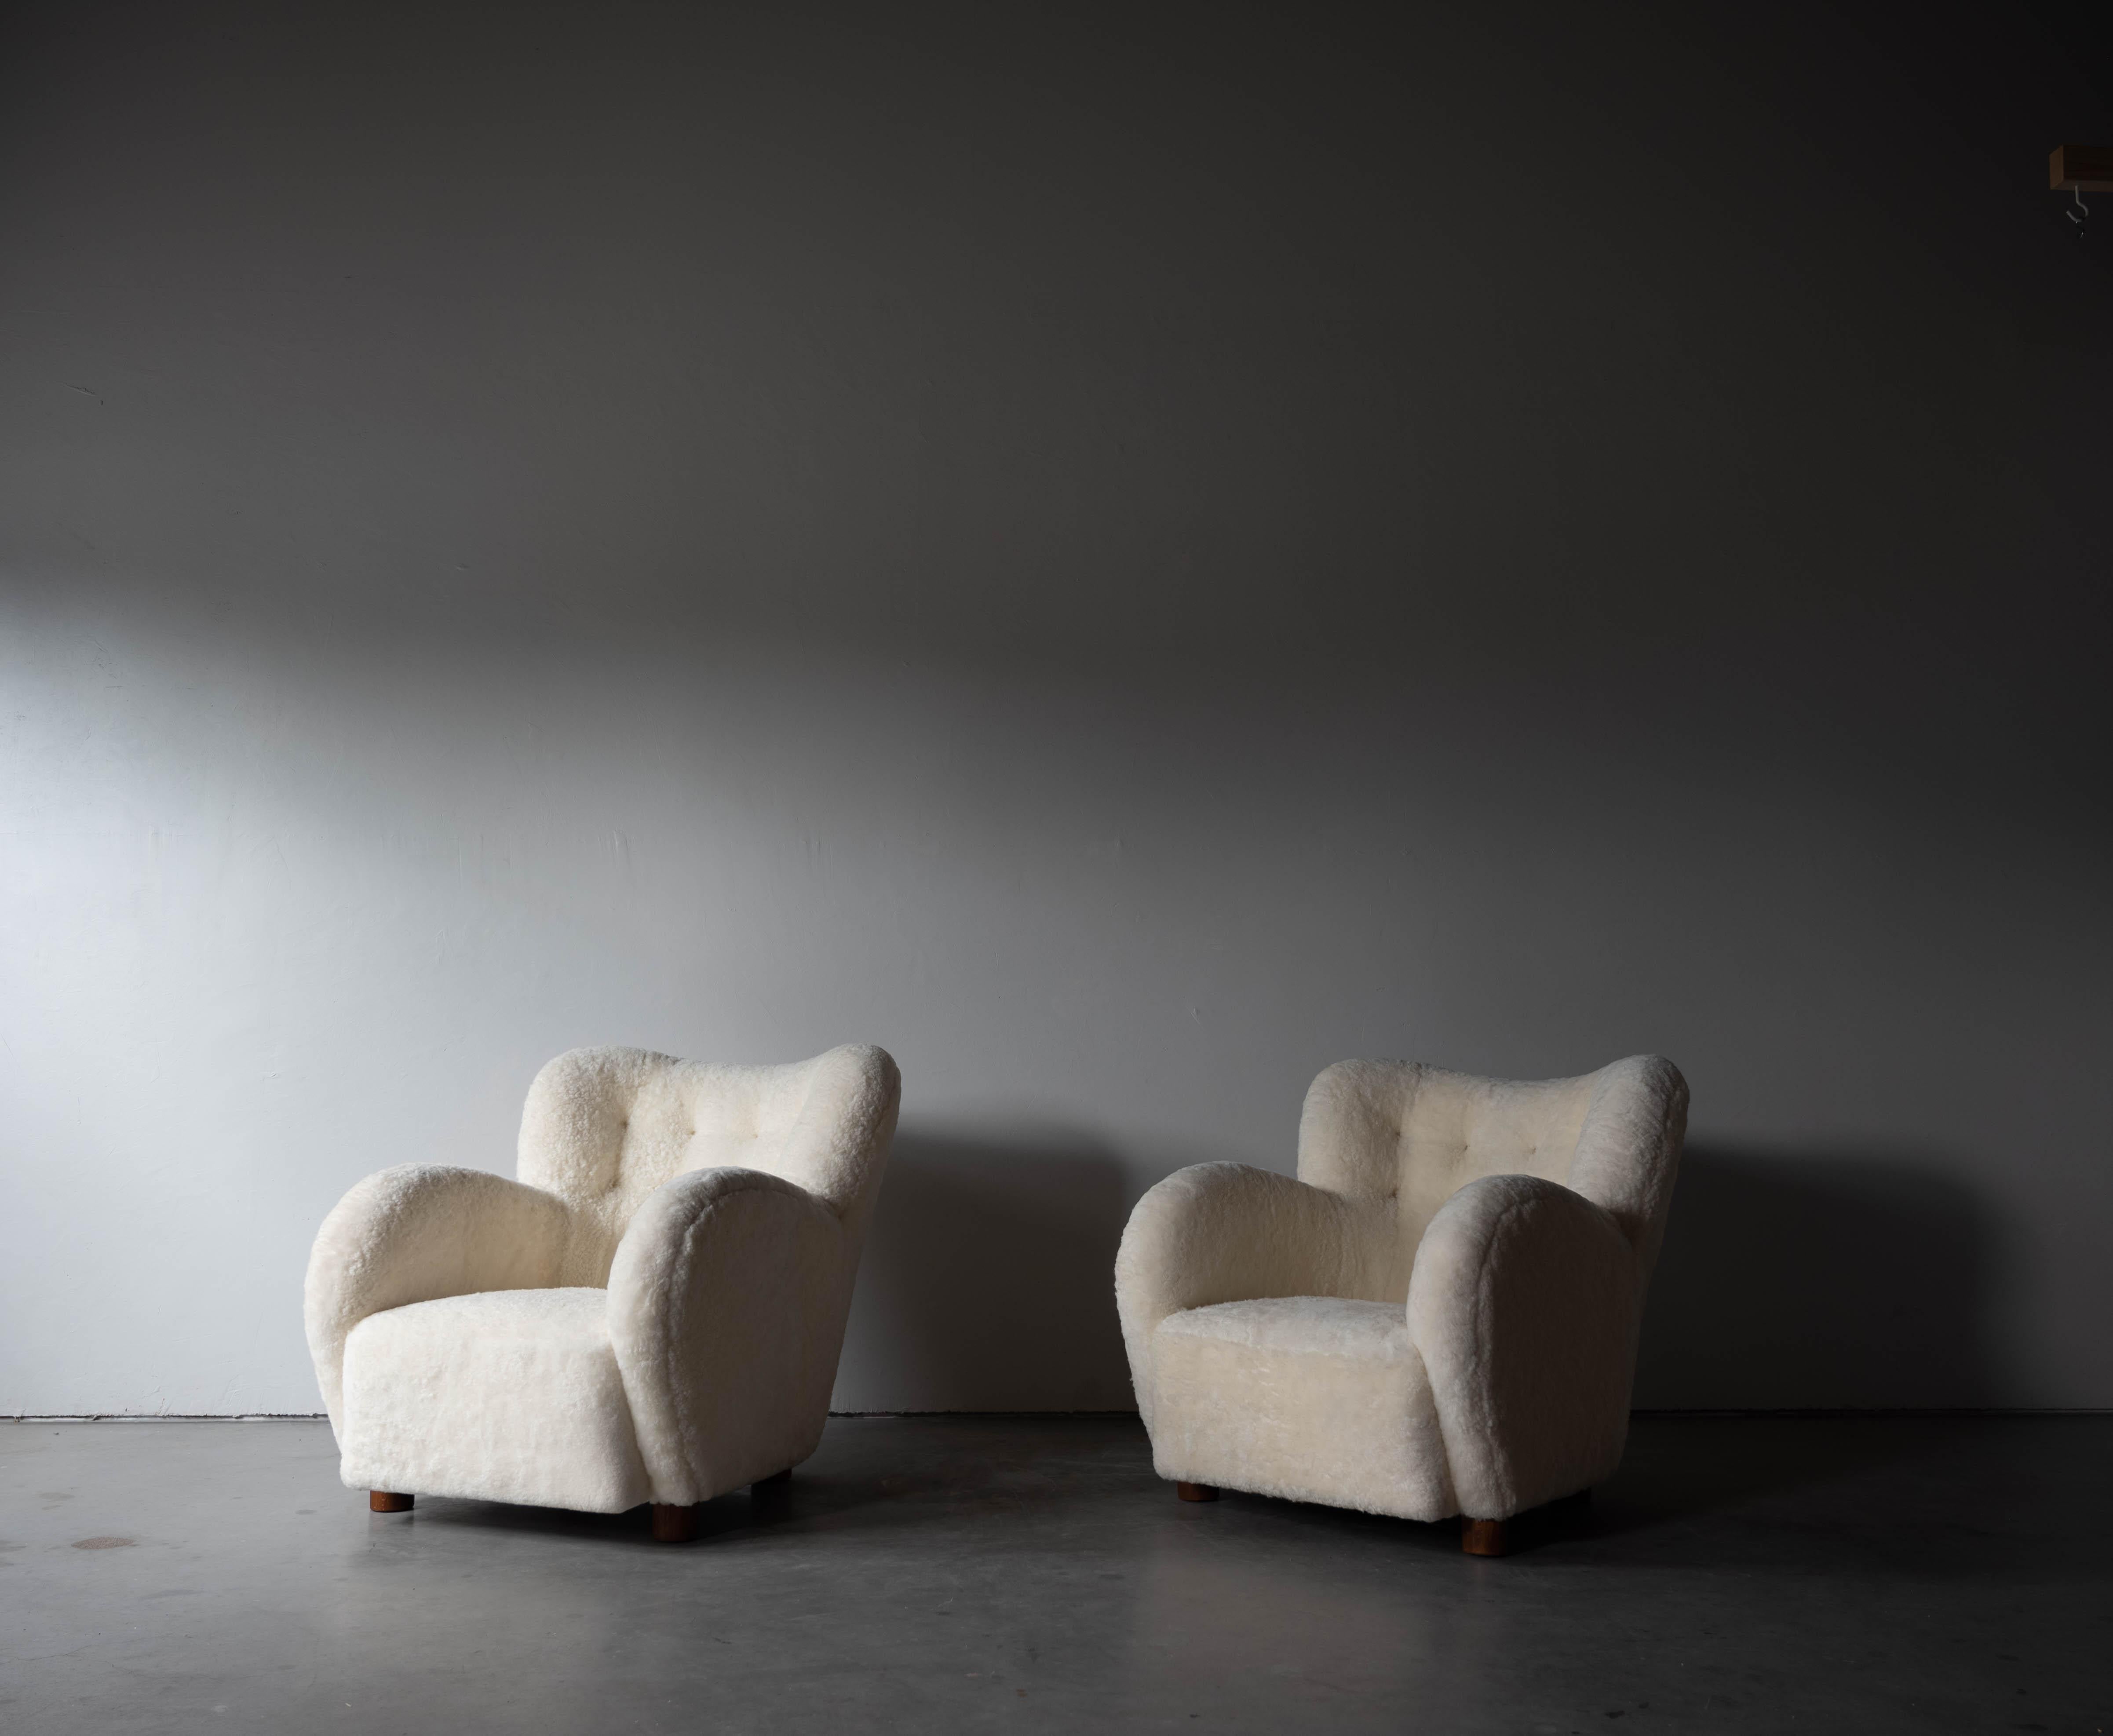 A pair of sheepskin and wood lounge chairs designed and produced in Denmark, 1940s.